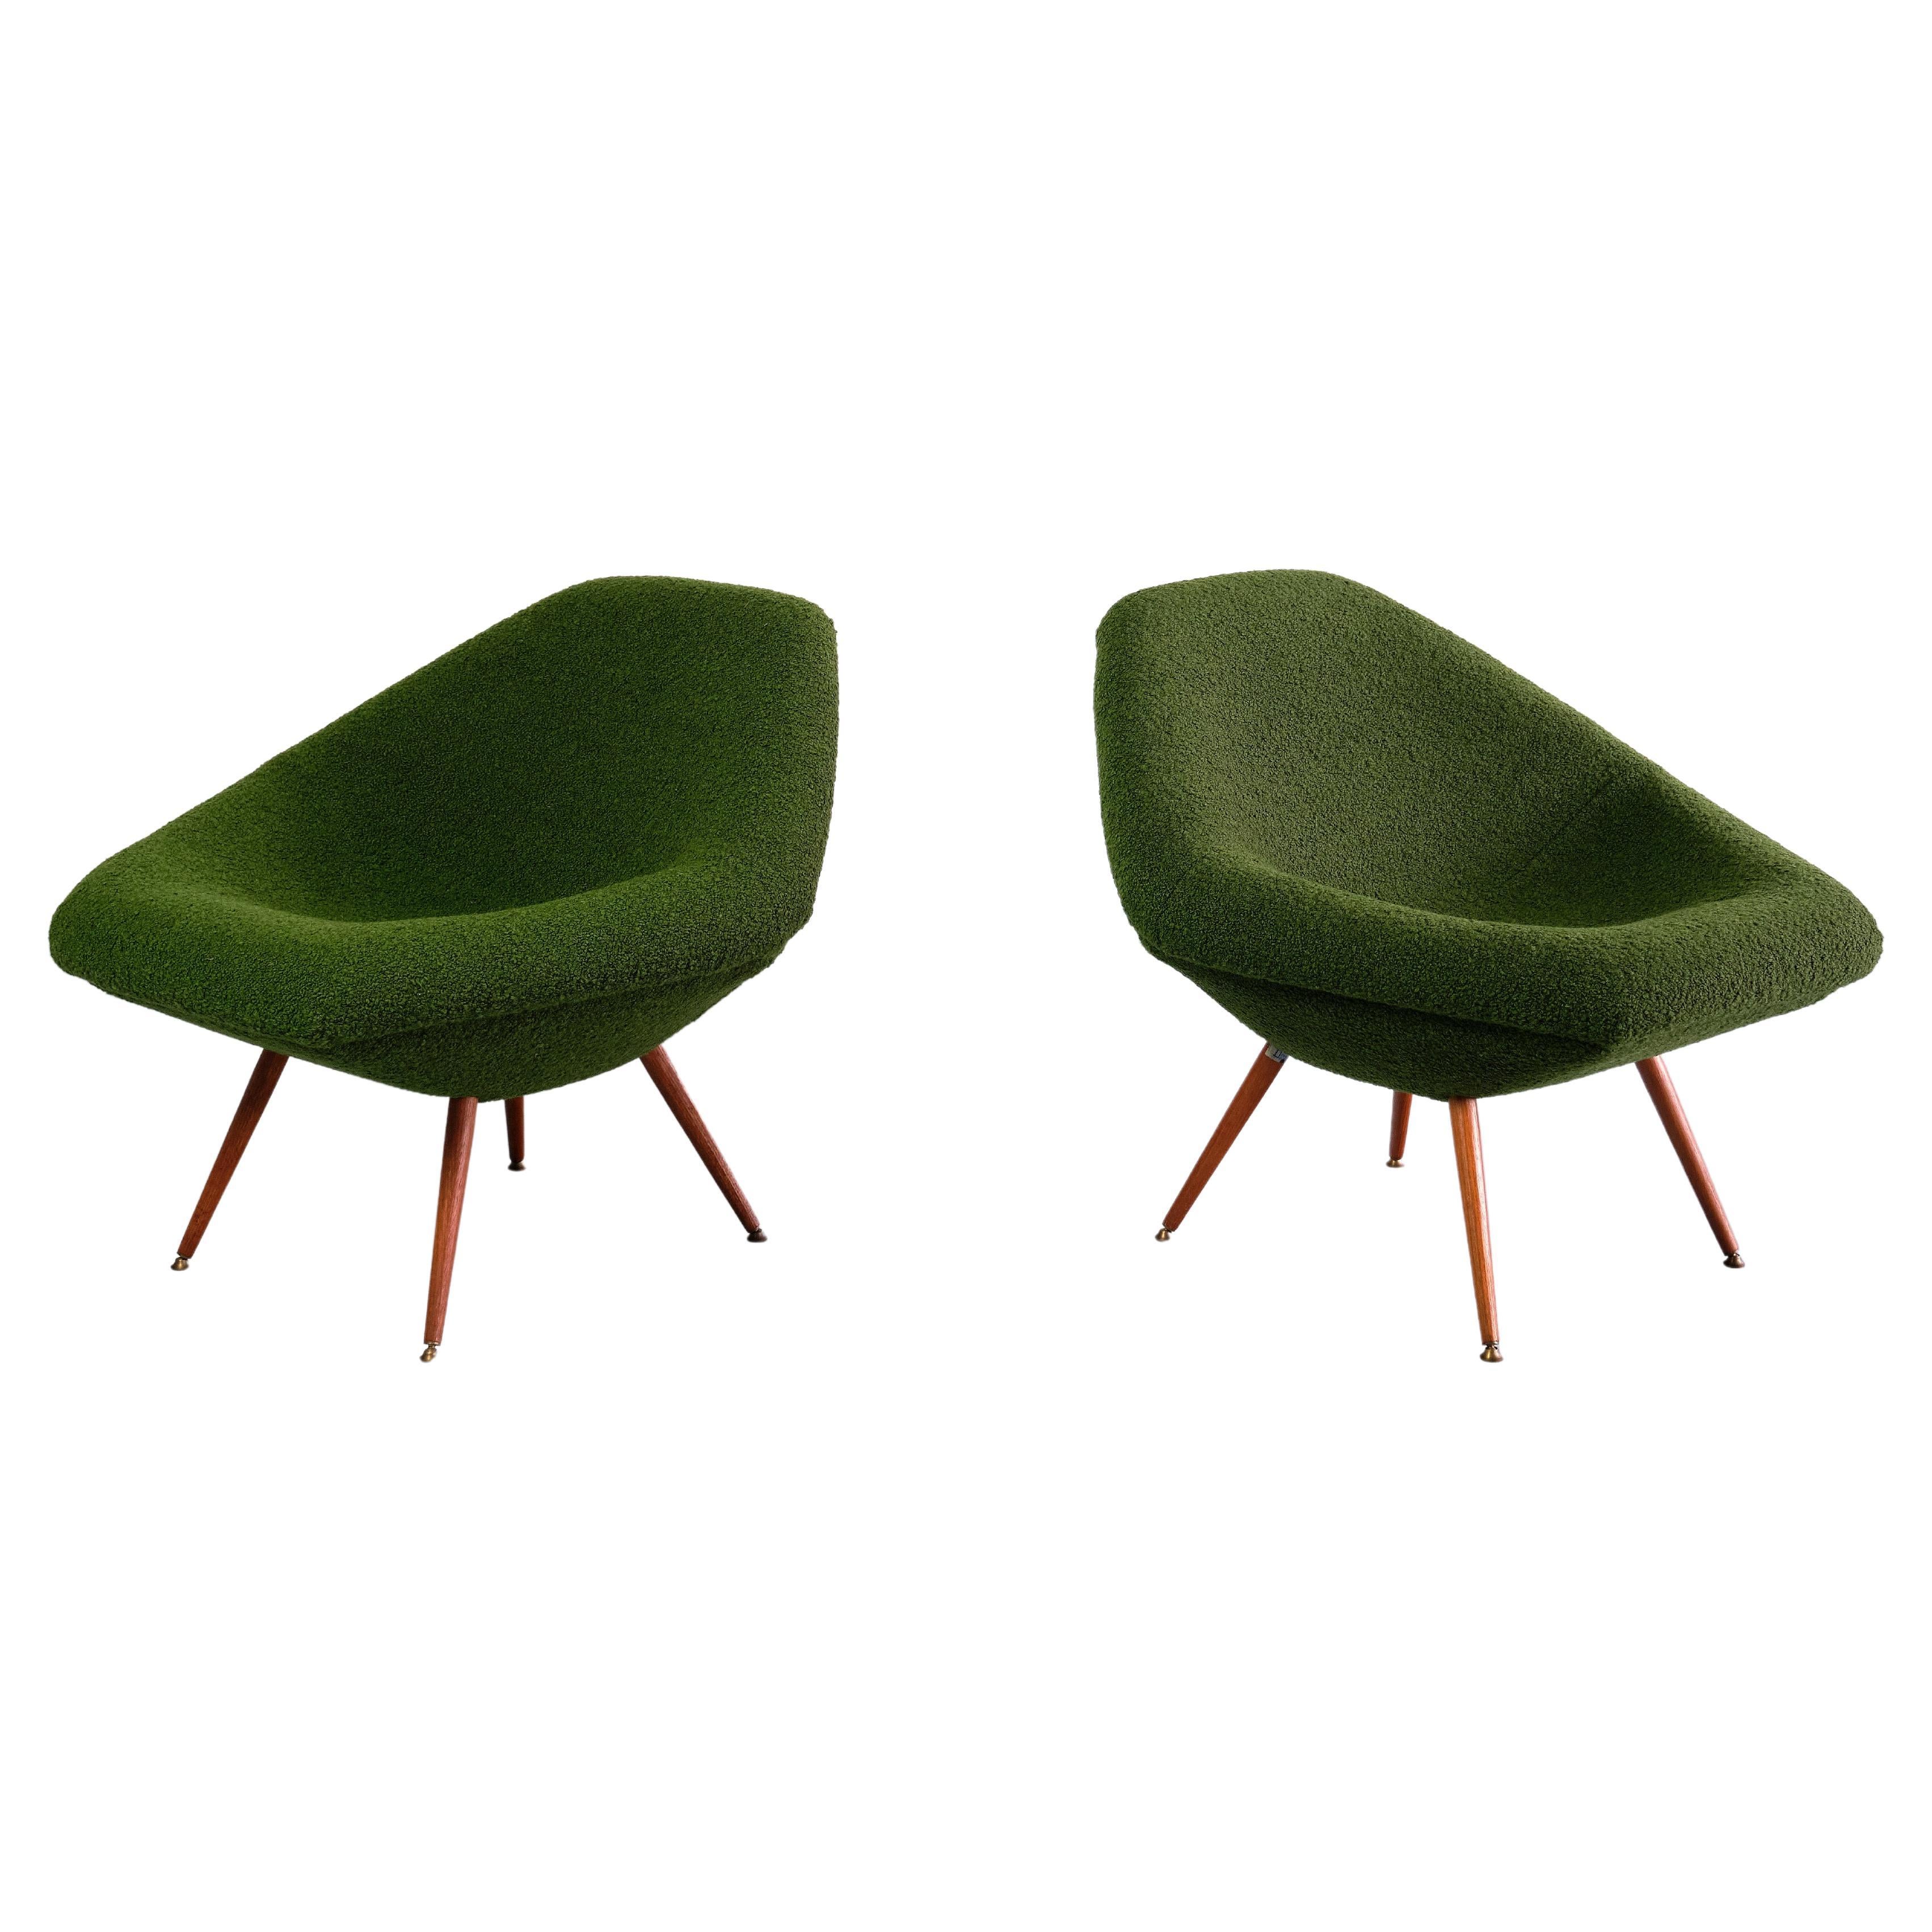 Pair of Arne Dahlén Lounge Chairs in Green Bouclé and Teak, Sweden, 1960s For Sale